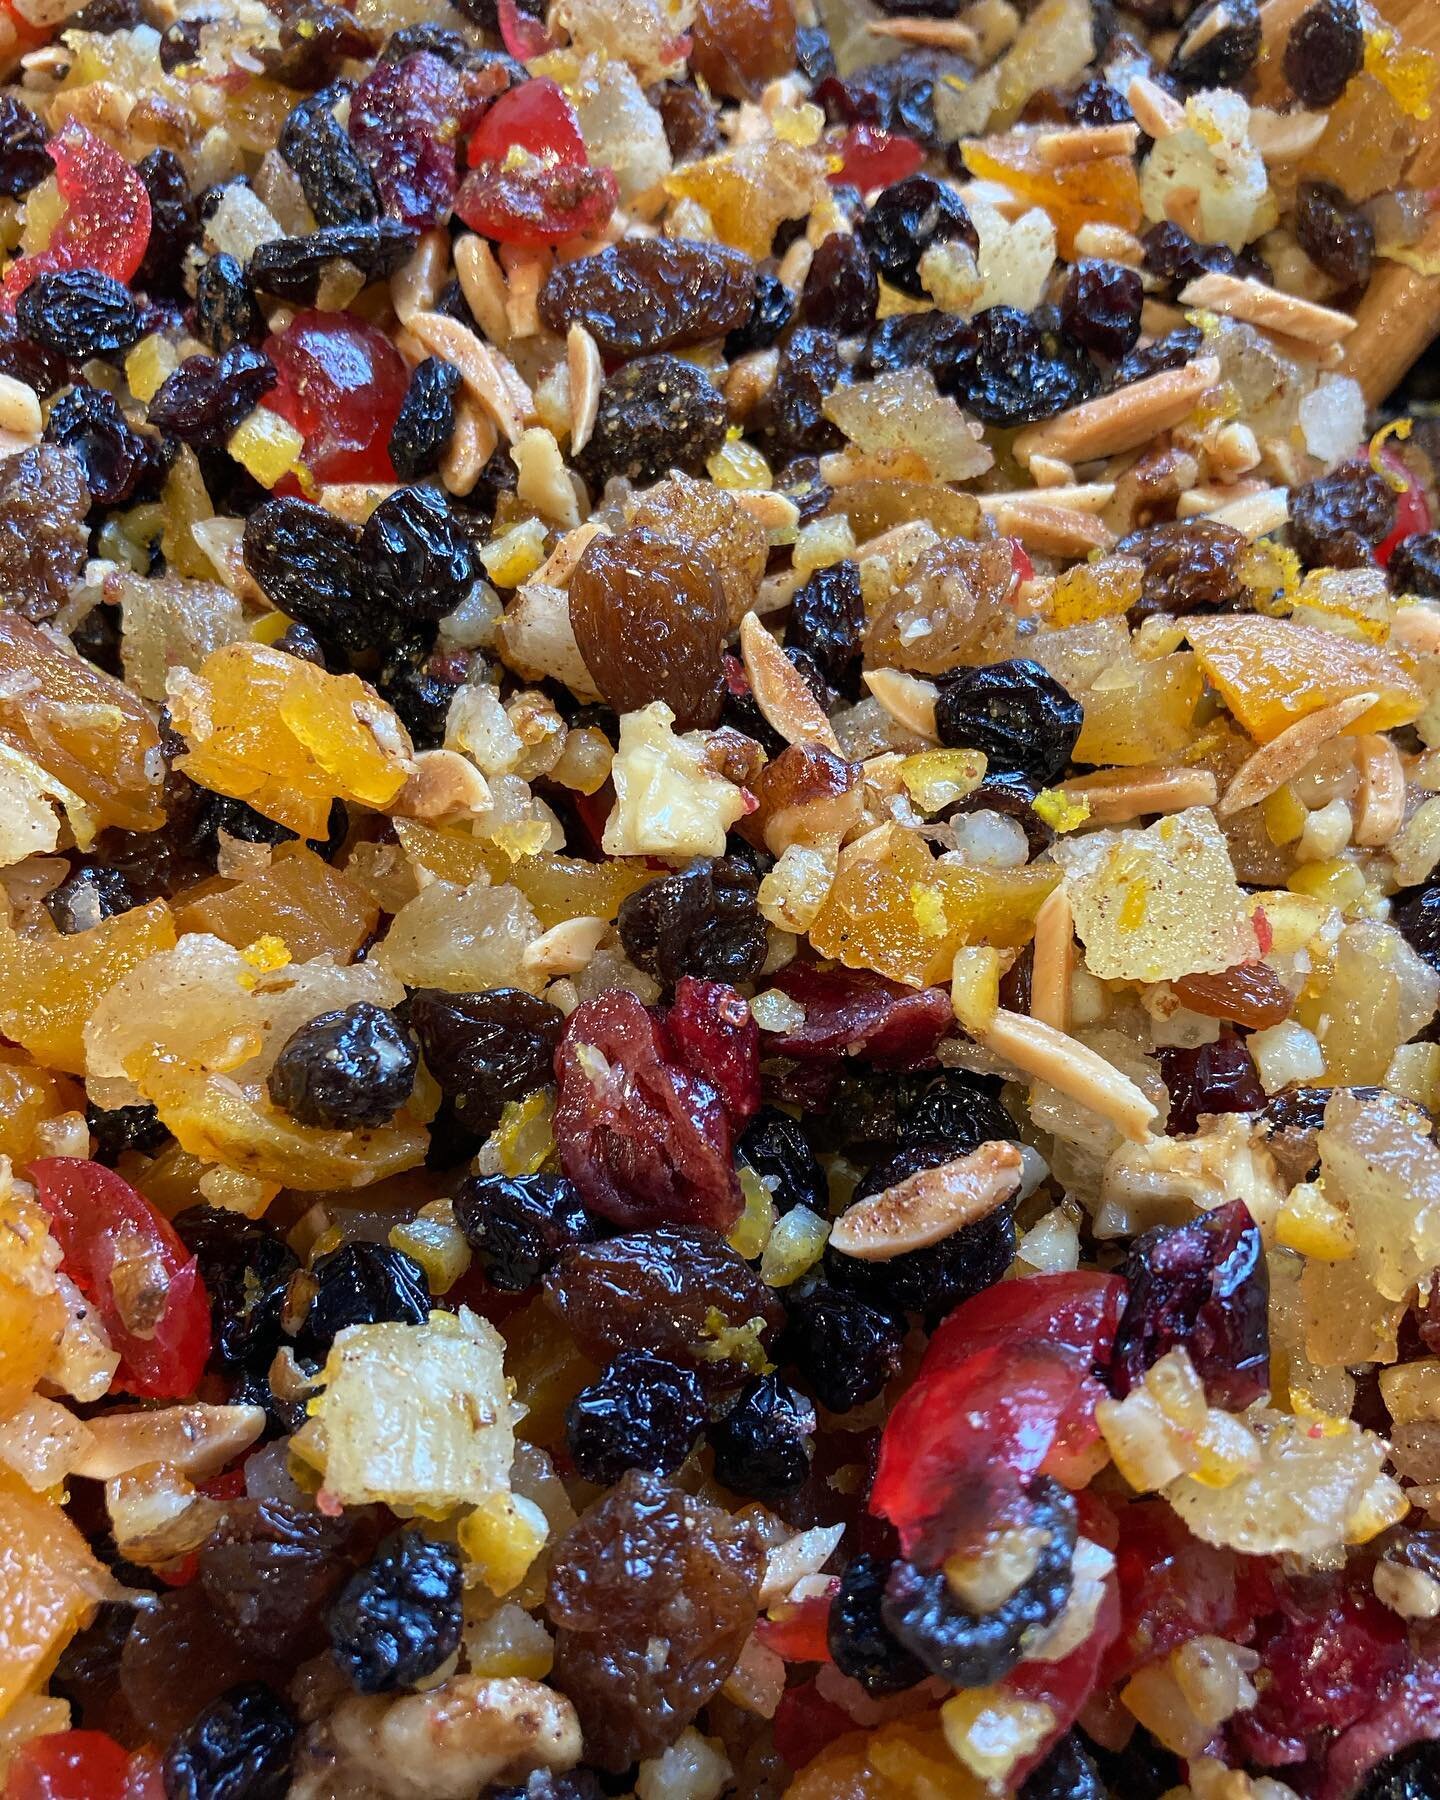 Holidays are coming&hellip; ✨&hearts;️ 
.
Just preparing the first mix of ingredients for our Christmas Cakes - now left to macerate in brandy for a while! 👌🏼
.
Can you name the 13 different Fruit &amp; Nuts in this colourful picture?? 
.
#bakeryli